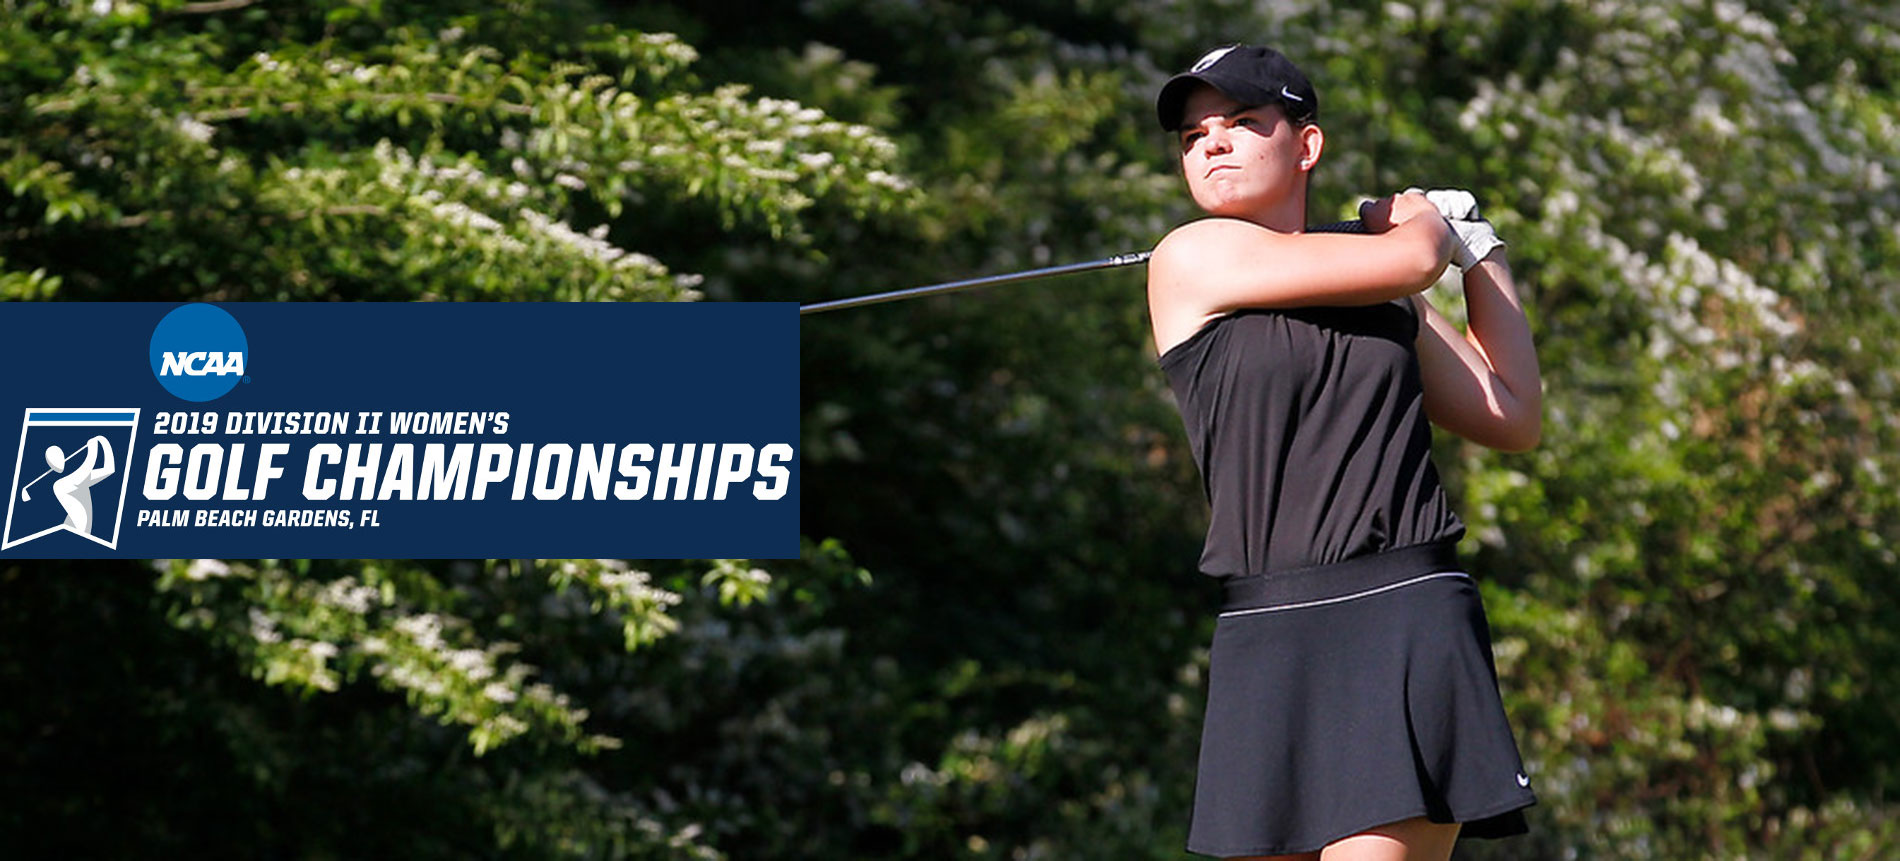 Hall Wraps up NCAA Women’s Golf Championships Tied for 72nd